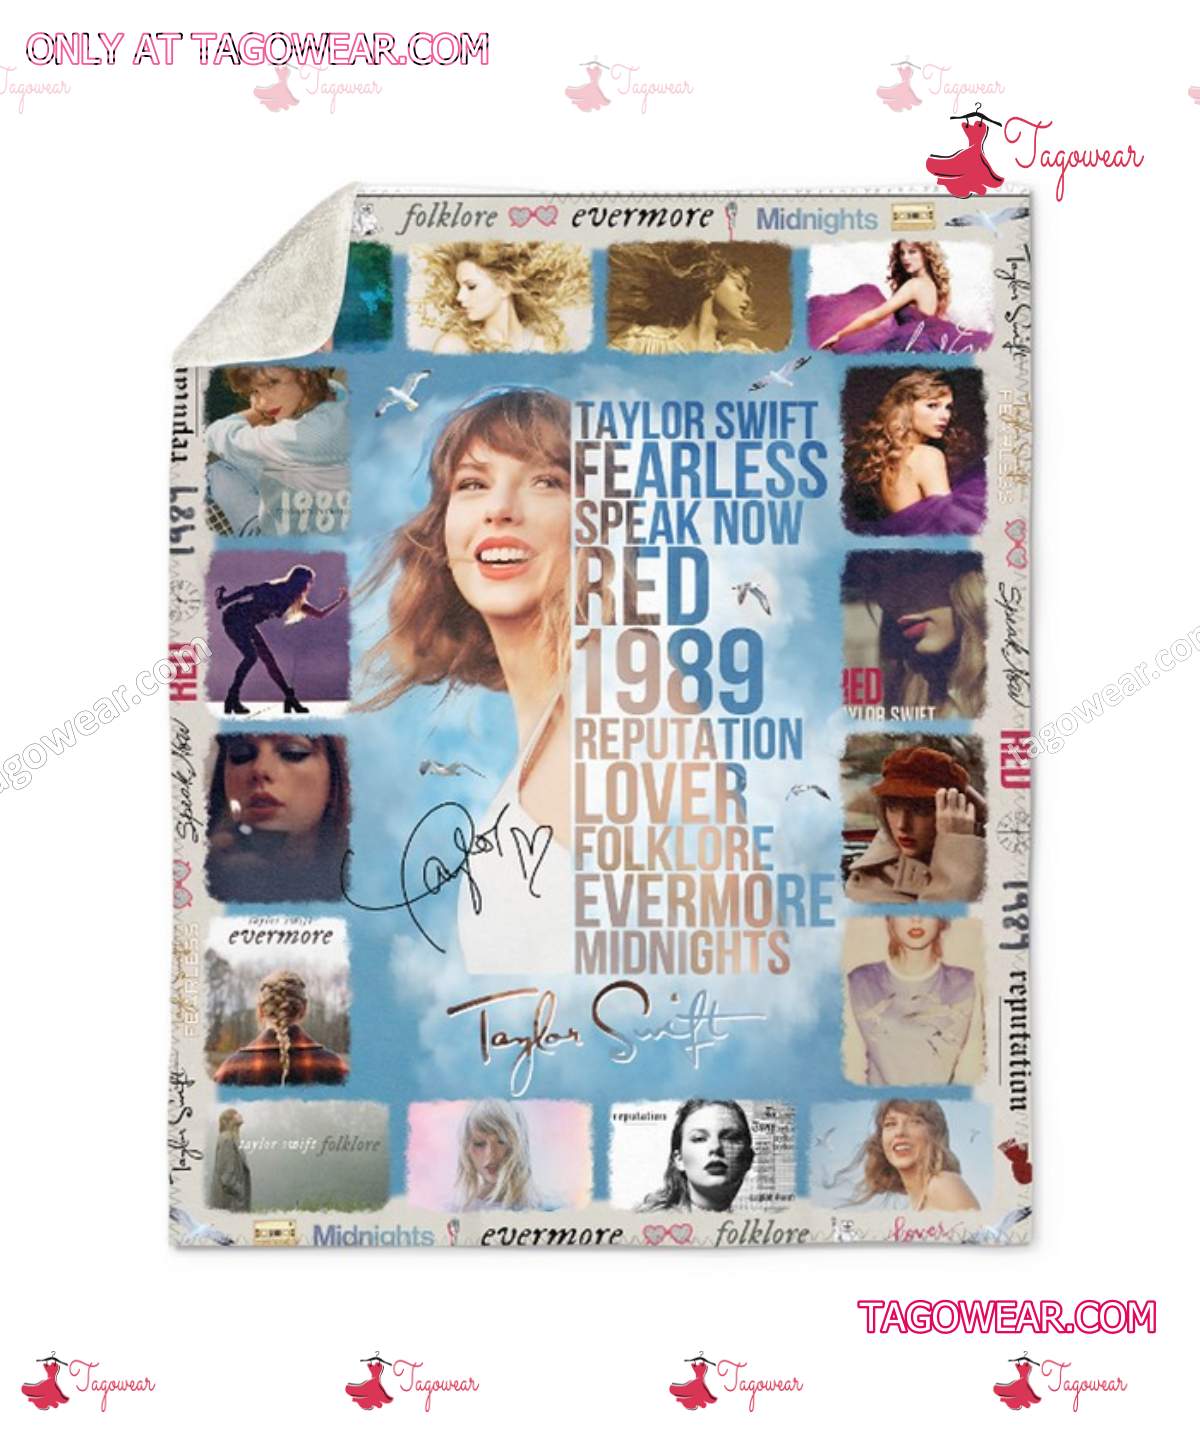 Taylor Swift Fearless Speak Now Red 1989 Reputation Lover Folklore Evermore Midnights Blanket a